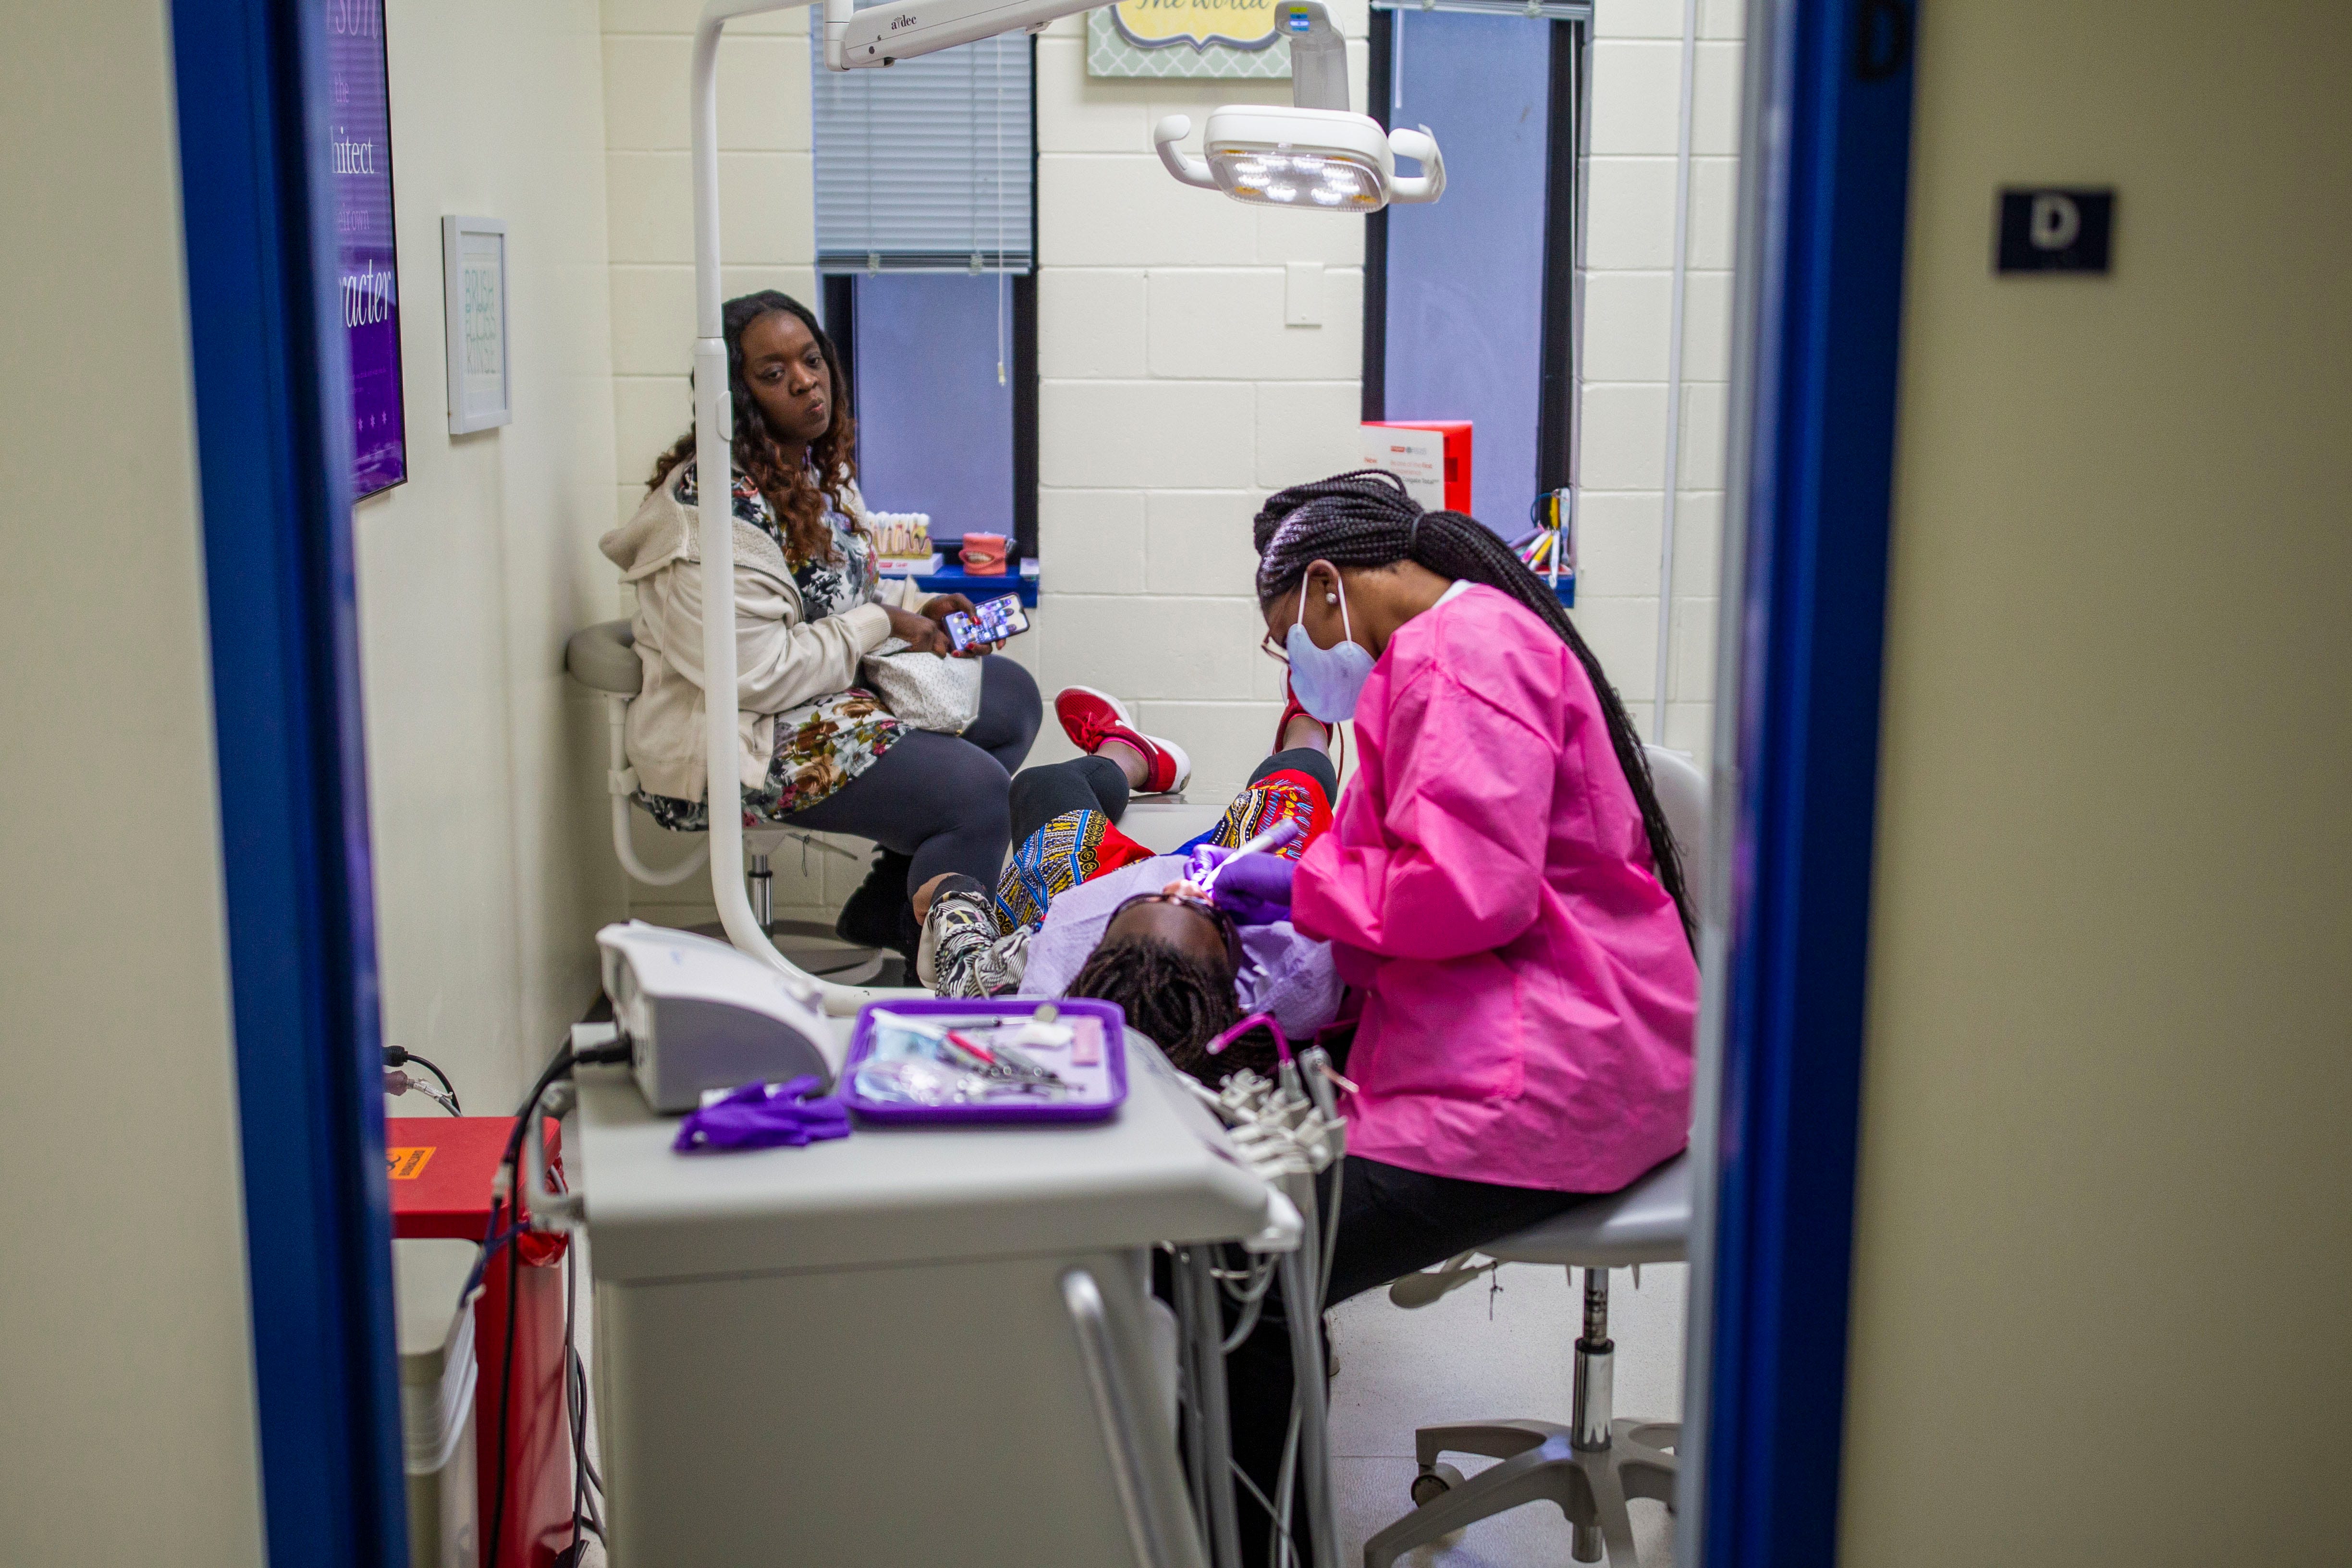 A dental hygienist cleans 11-year-old Deitra "DeeDee" Jackson’s teeth at Neighborhood Medical Center as her mom Kisha Simms, 38, looks on in this file photo.